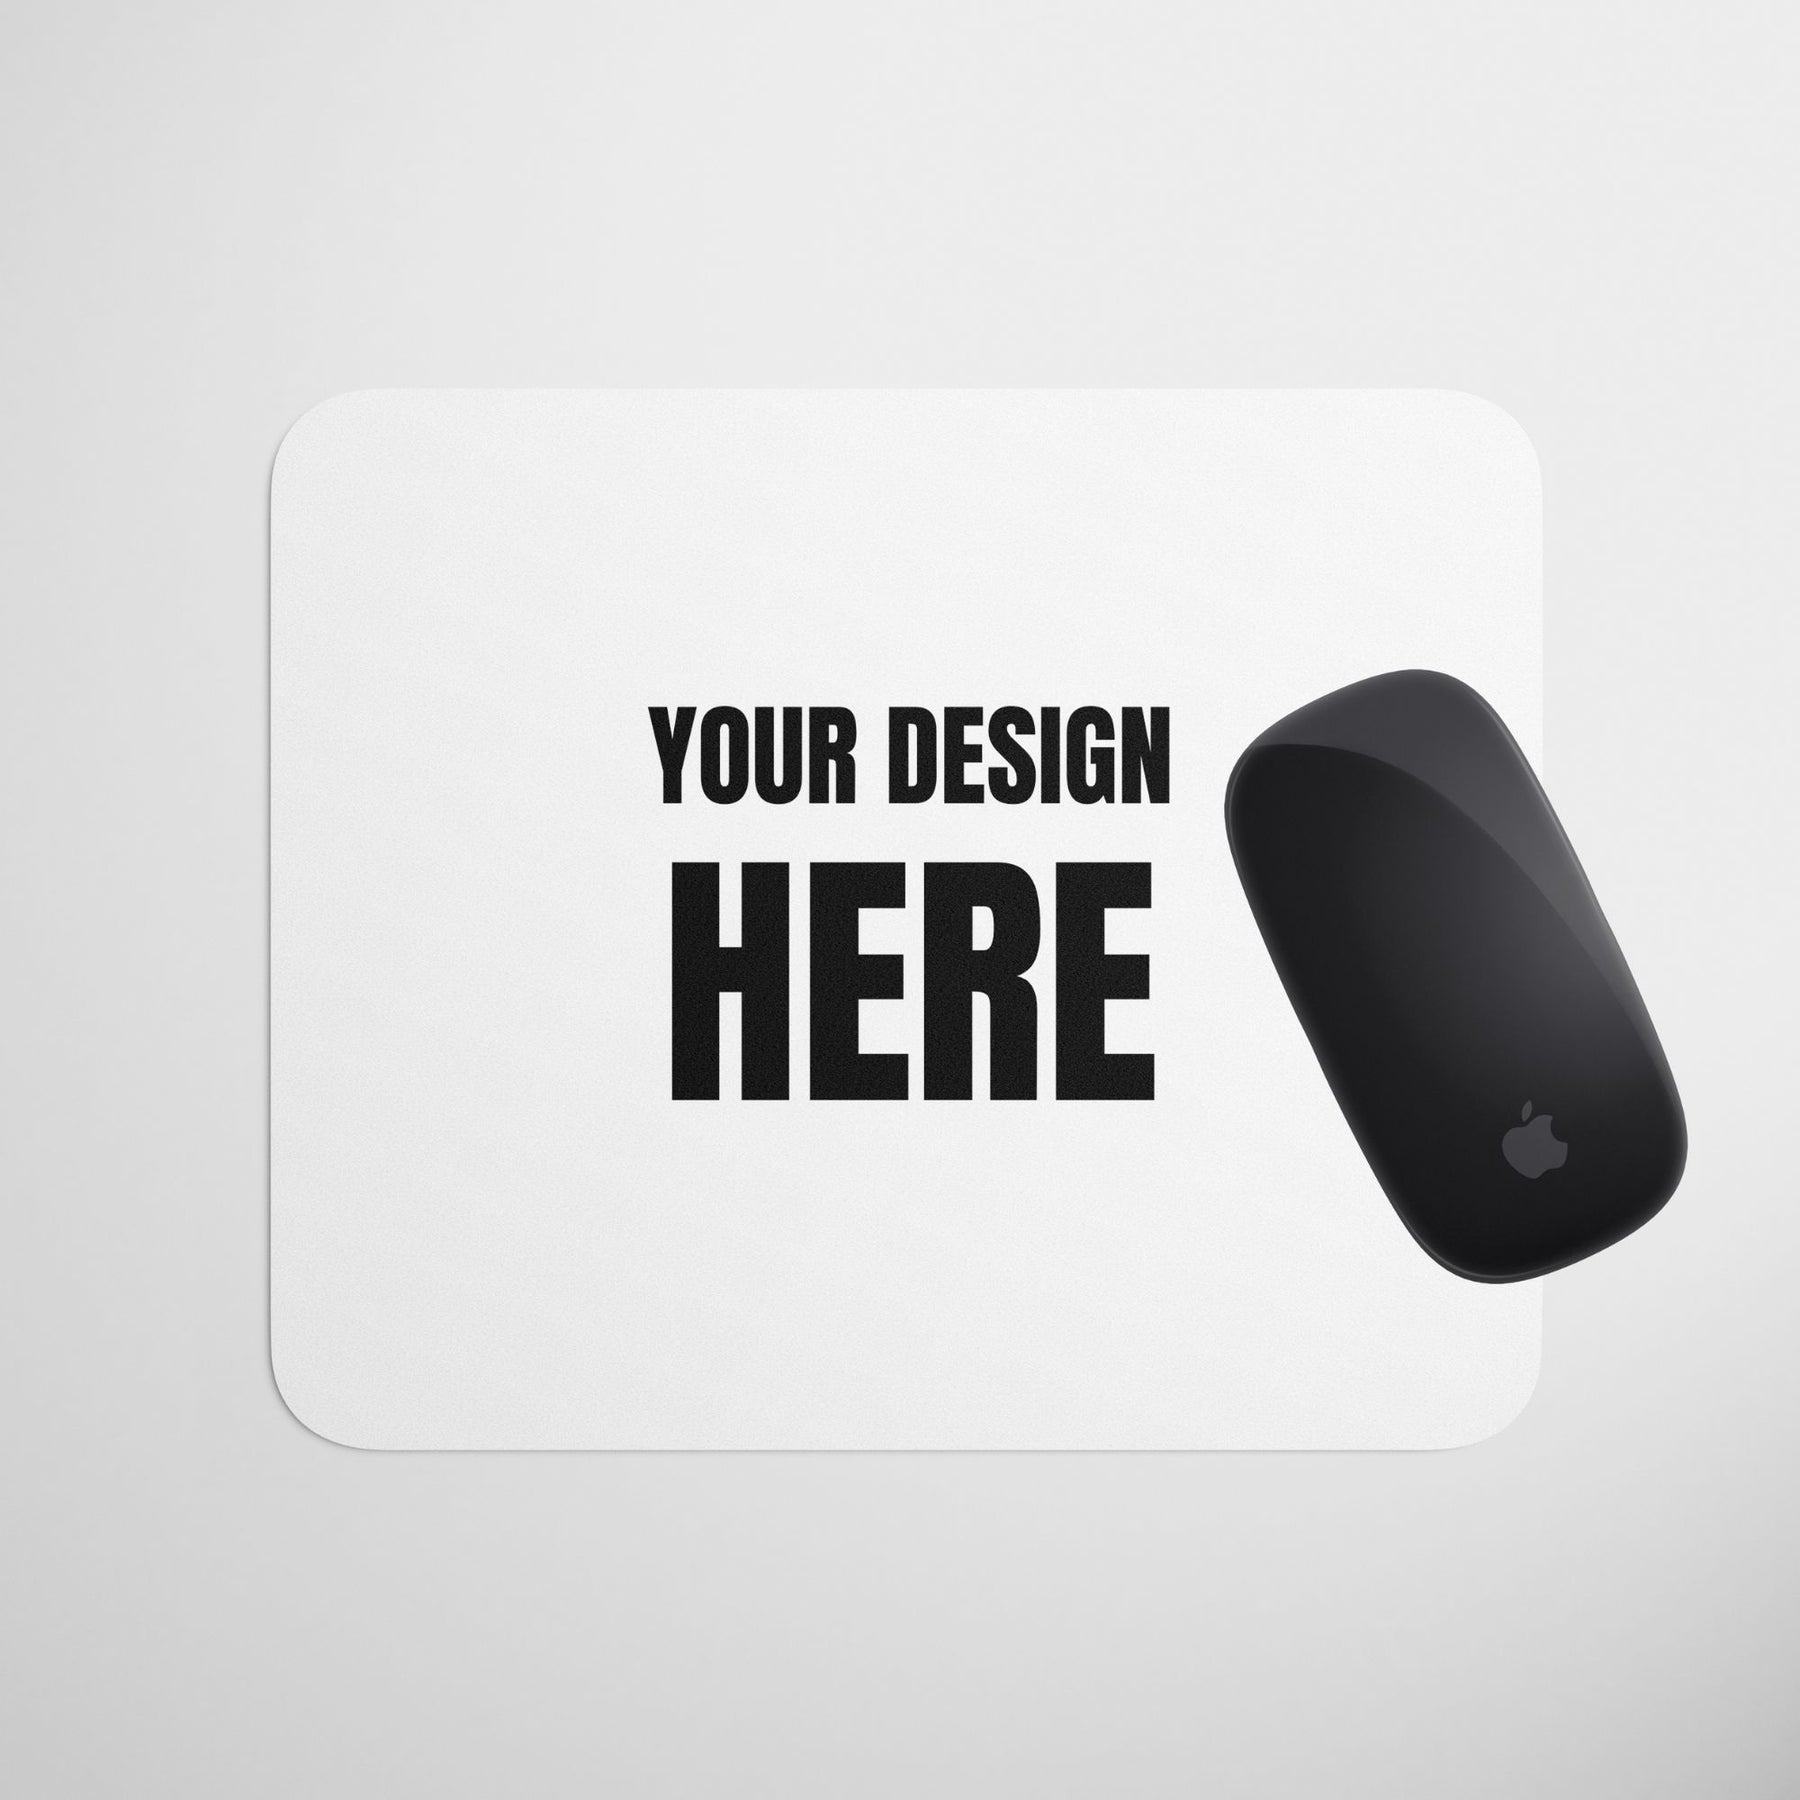 your-design-here-mouse-pad-gogirgit-com-2